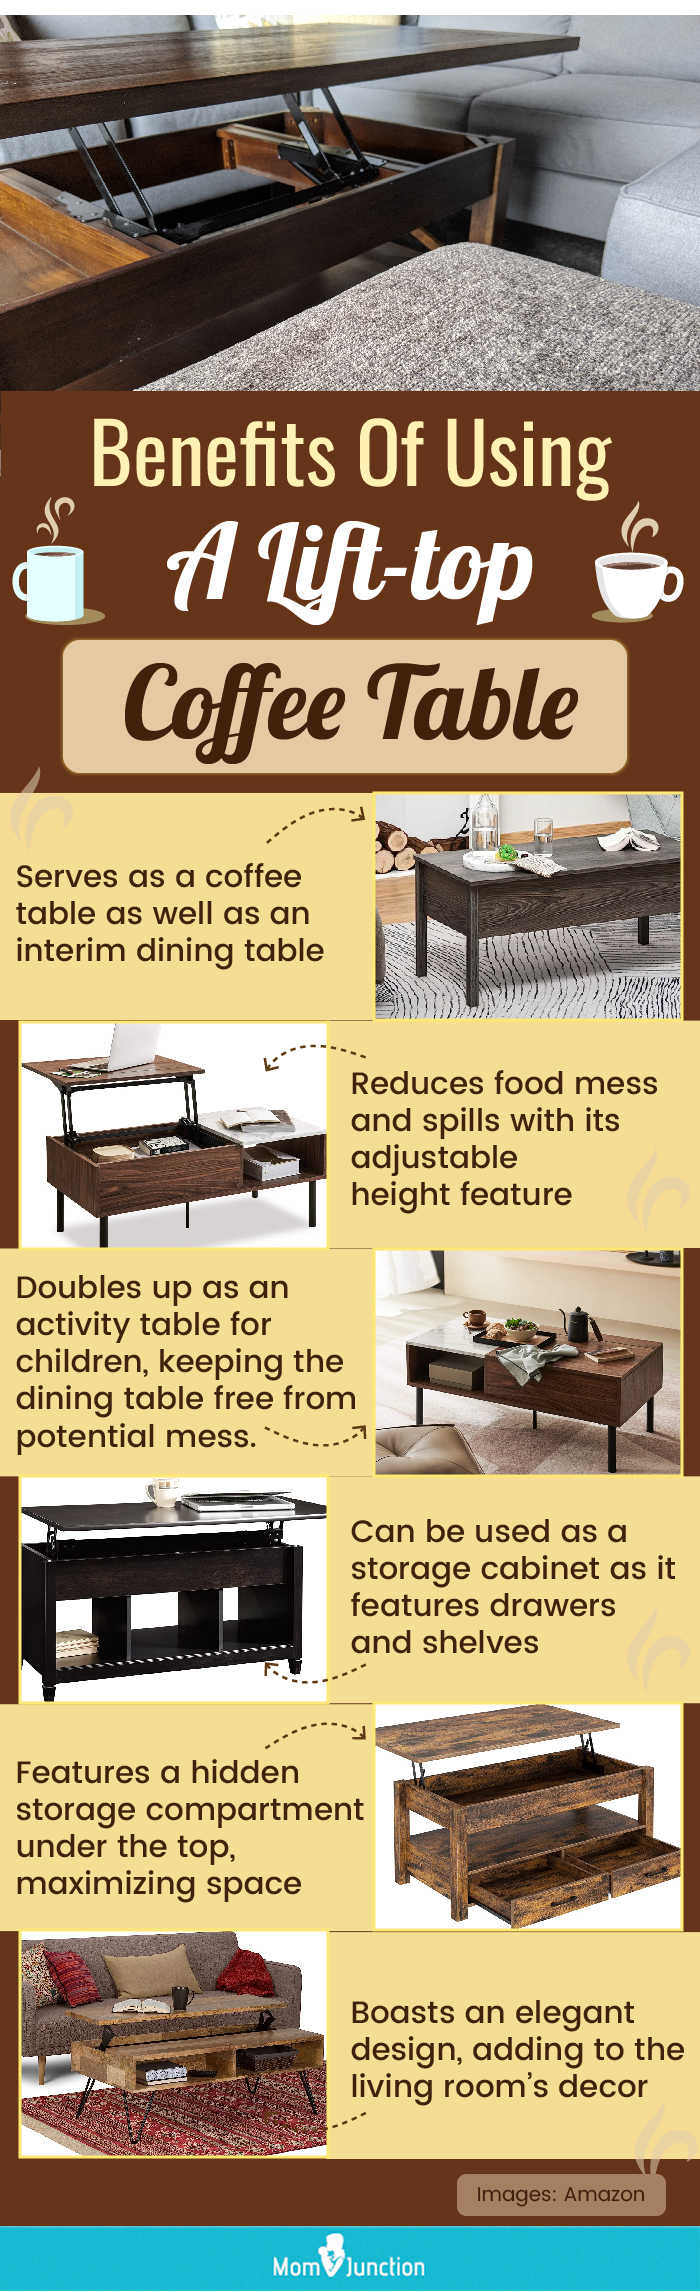 Benefits of Using A Lift-top Coffee Table (infographic)